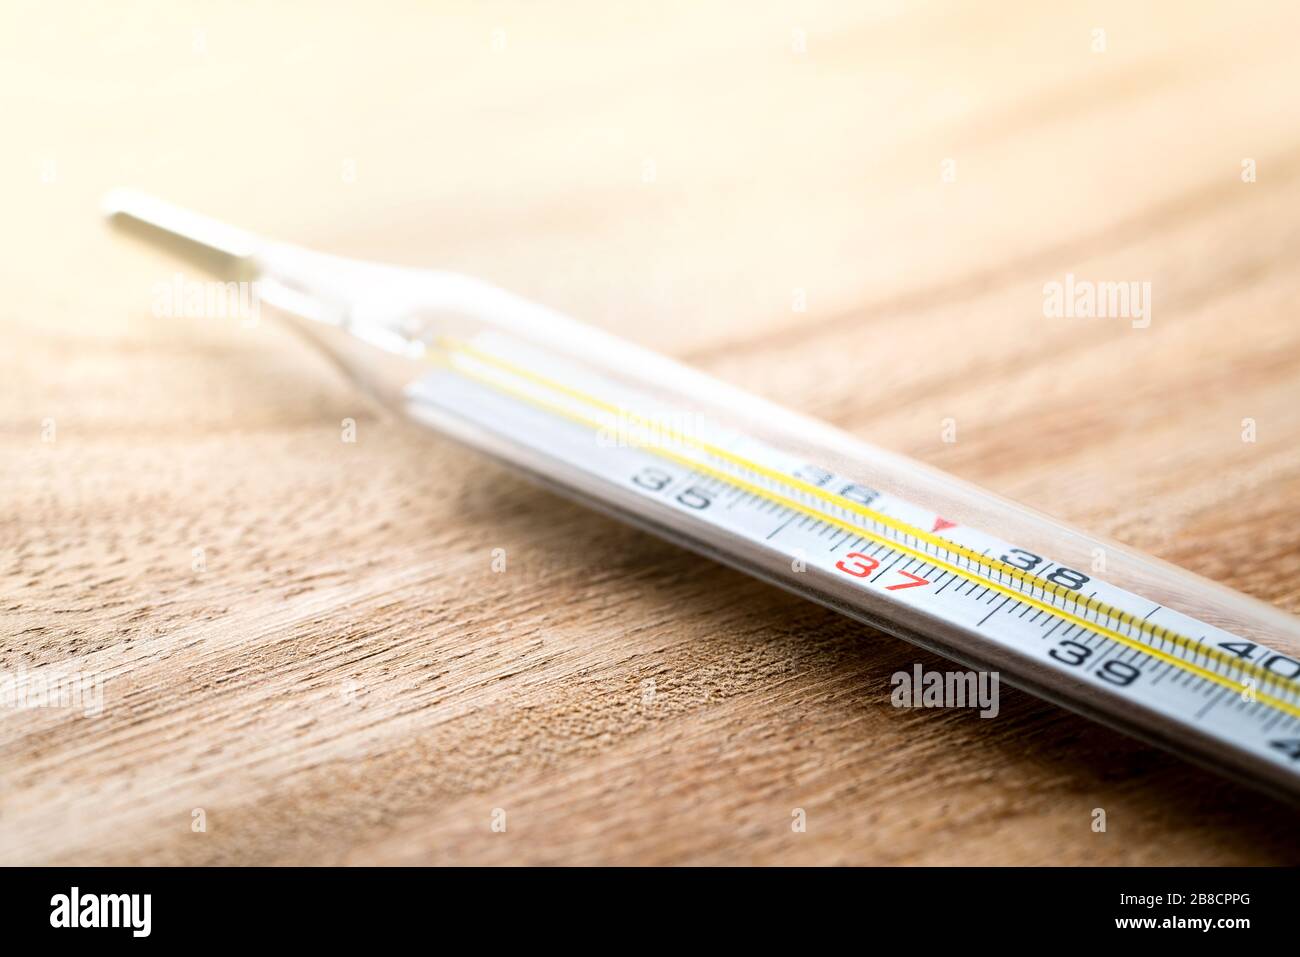 Celsius thermometer on wooden table. Having fever, flu, sickness, virus and being sick concept. Body temperature measurement in health care. Stock Photo